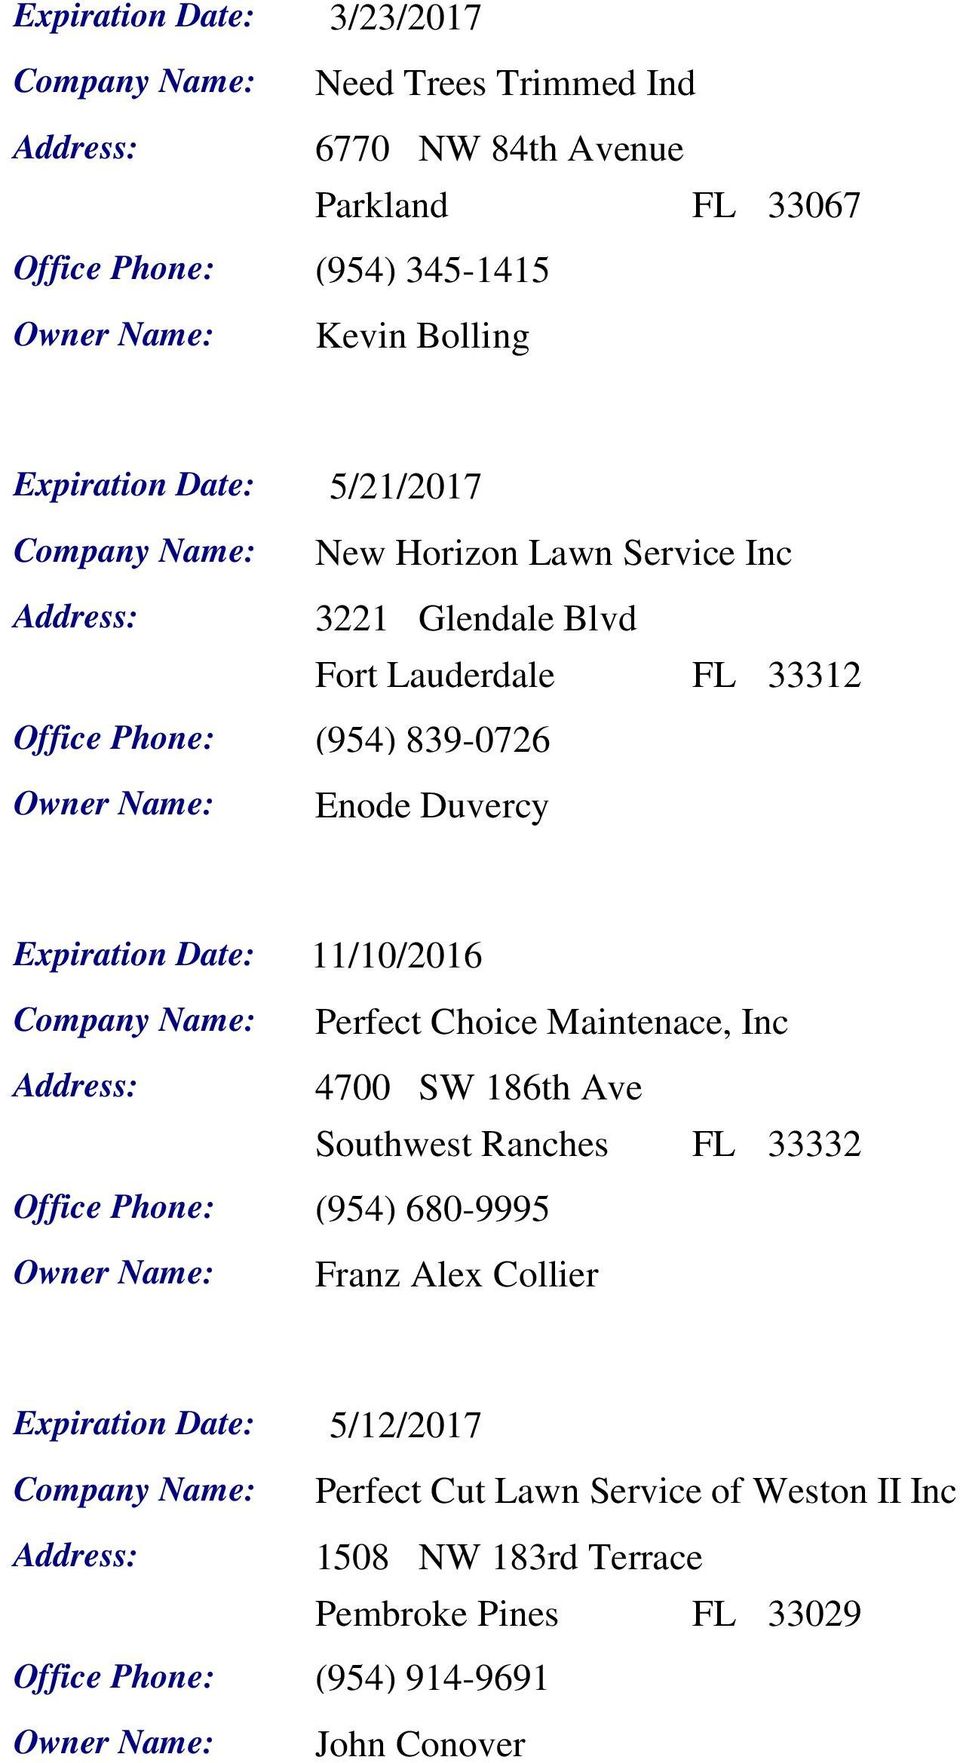 Date: 11/10/2016 Perfect Choice Maintenace, Inc Address: 4700 SW 186th Ave Southwest Ranches FL 33332 Office Phone: (954) 680-9995 Franz Alex Collier